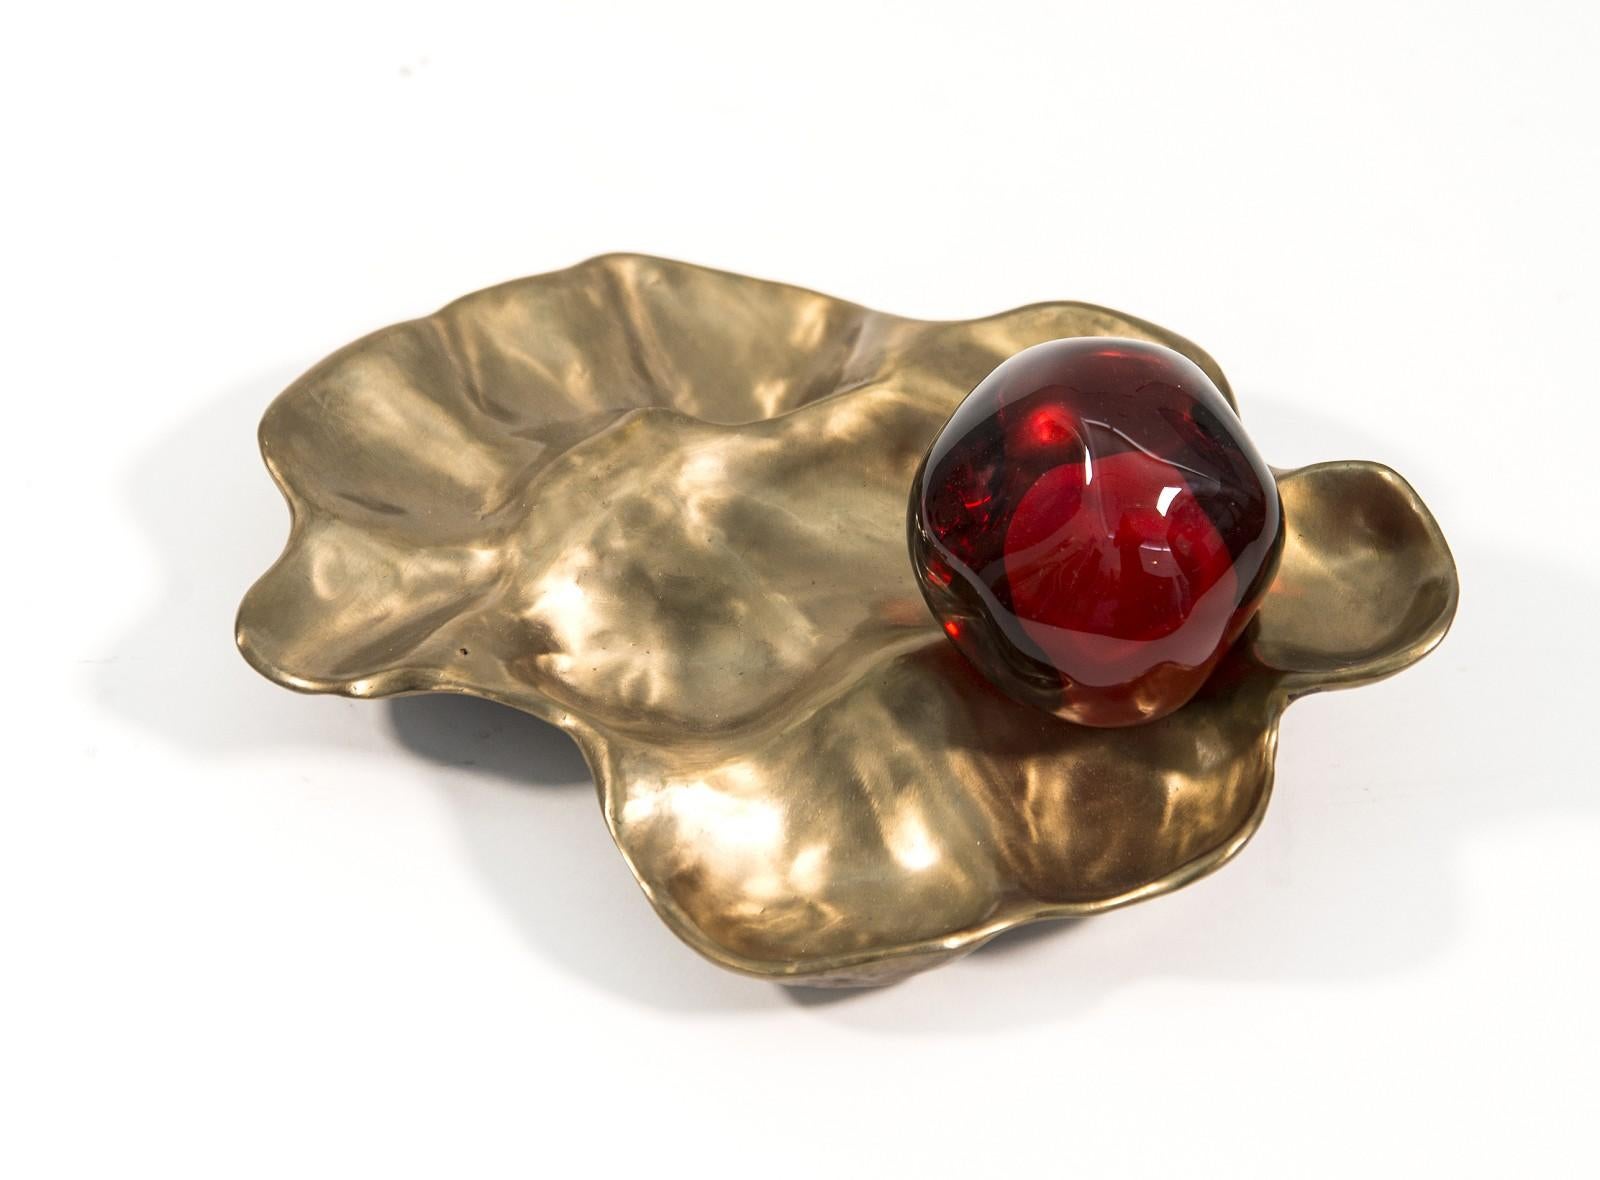 Pomegranate with Casing - small, bright red, glass, bronze, still life sculpture - Contemporary Sculpture by Catherine Vamvakas Lay